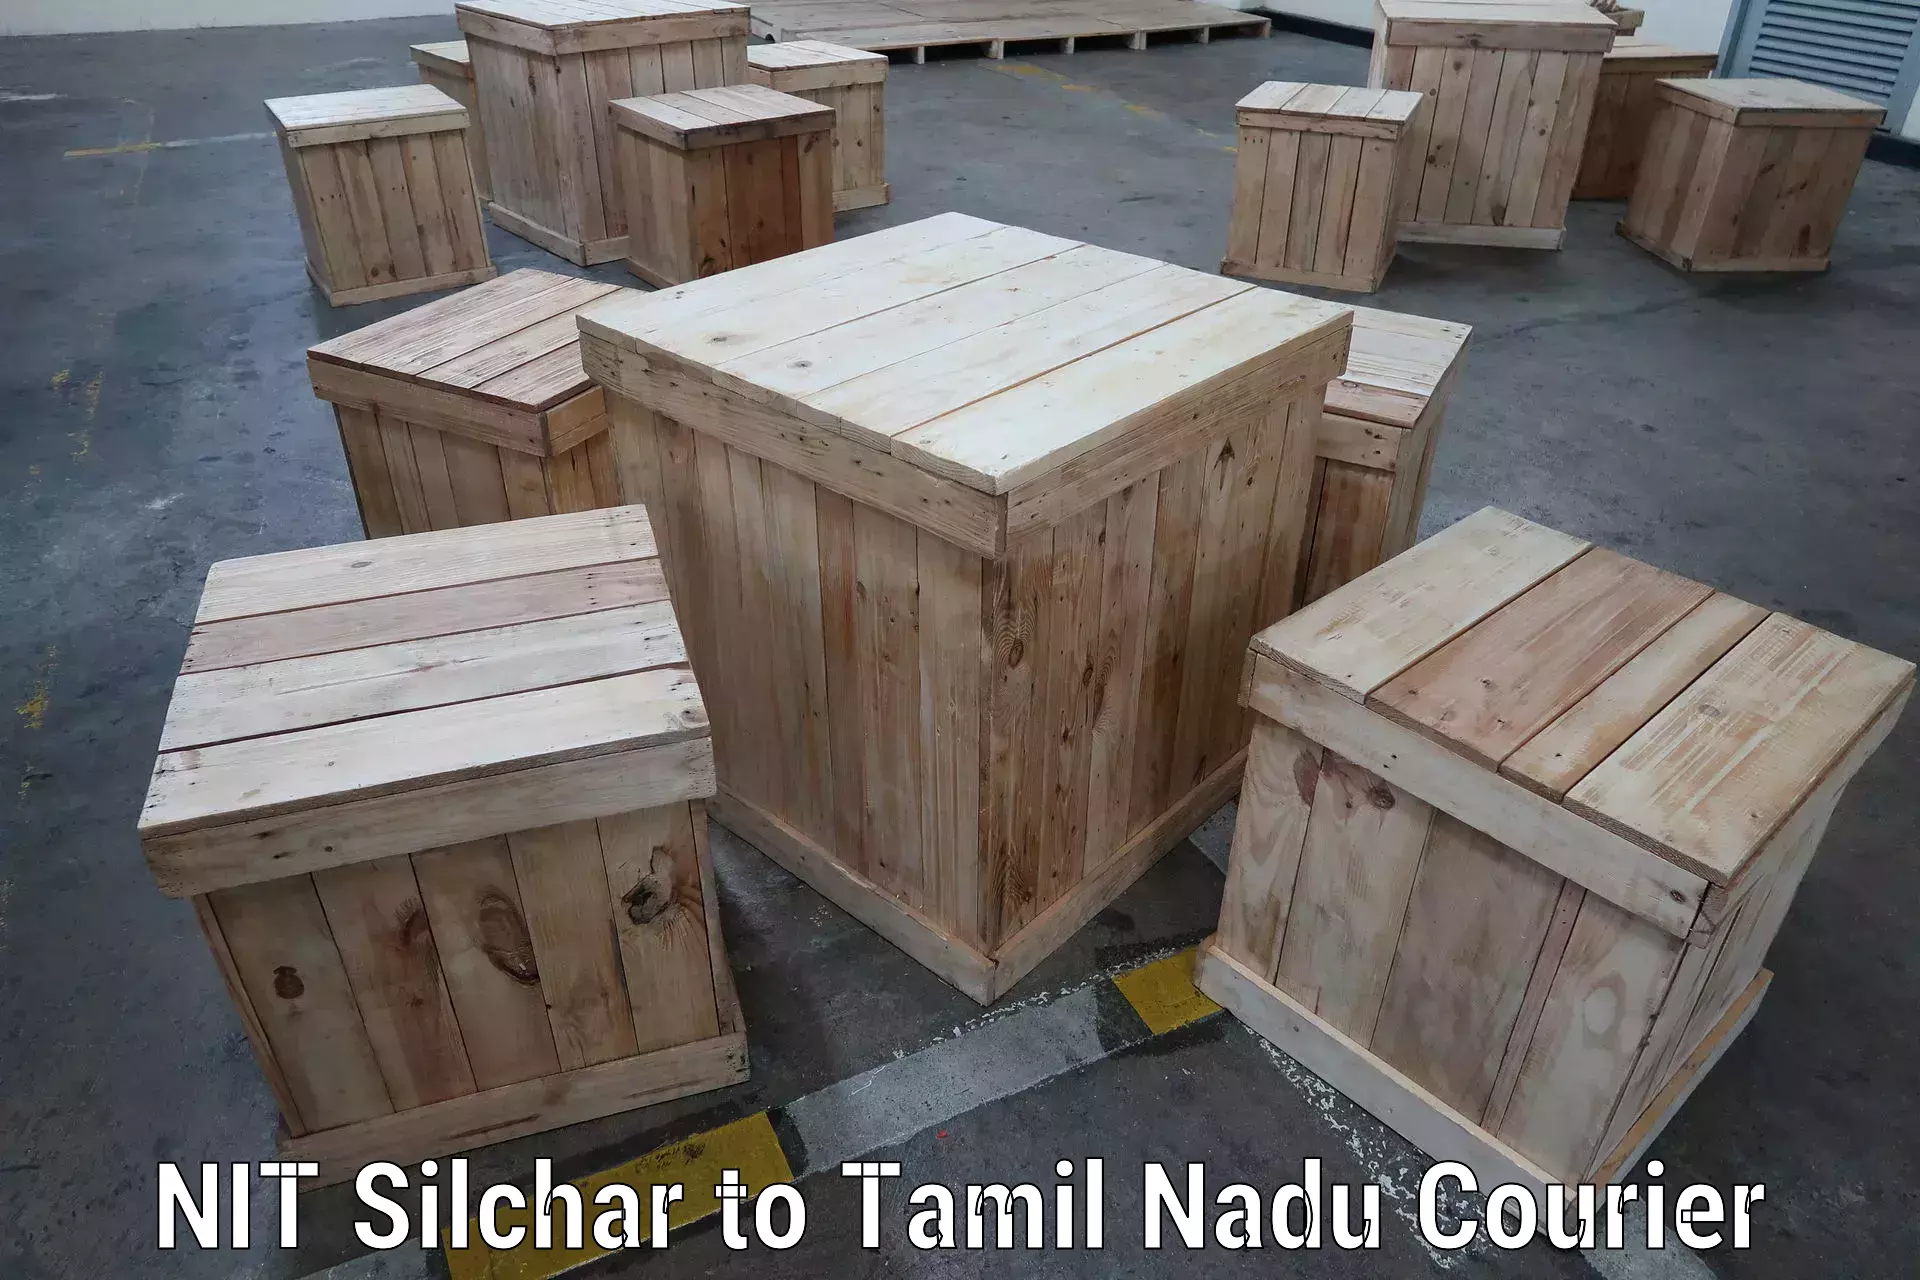 Subscription-based courier NIT Silchar to Sivakasi